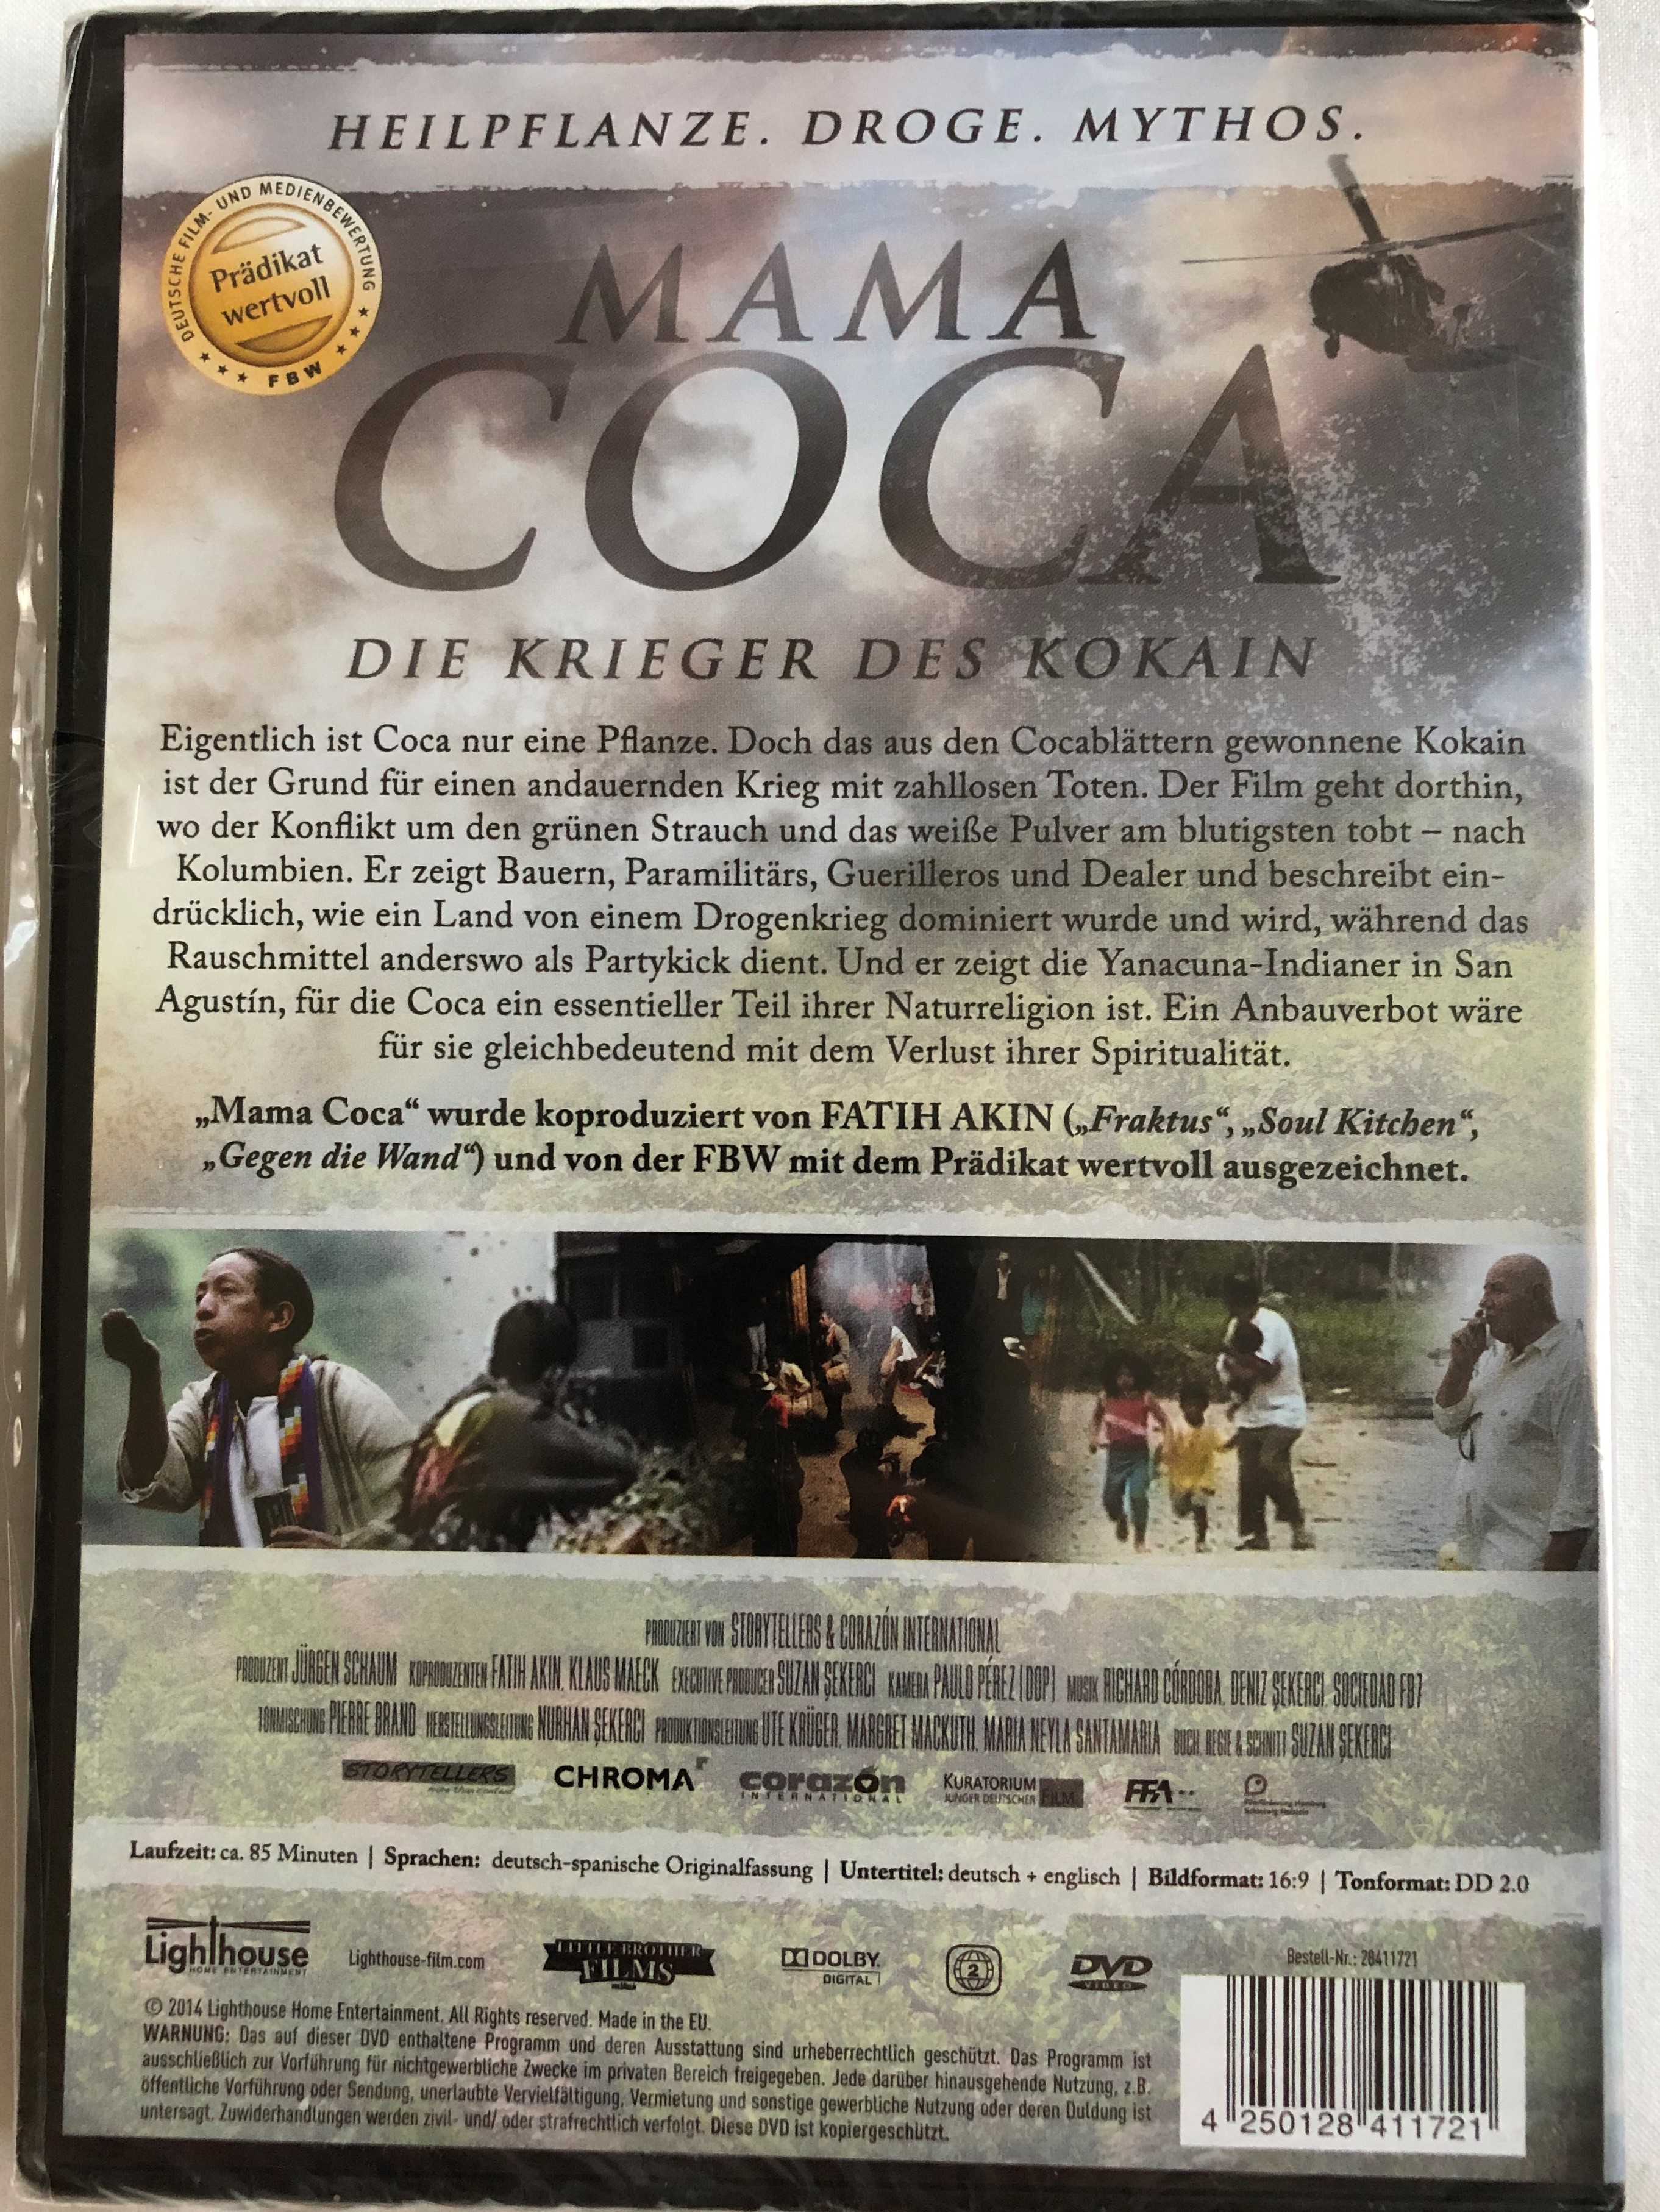 mama-coca-die-krieger-des-kokain-dvd-2014-mama-coca-warriors-of-cocaine-directed-by-suzan-sekerci-a-faith-akin-co-production-german-documentary-about-drug-wars-2-.jpg